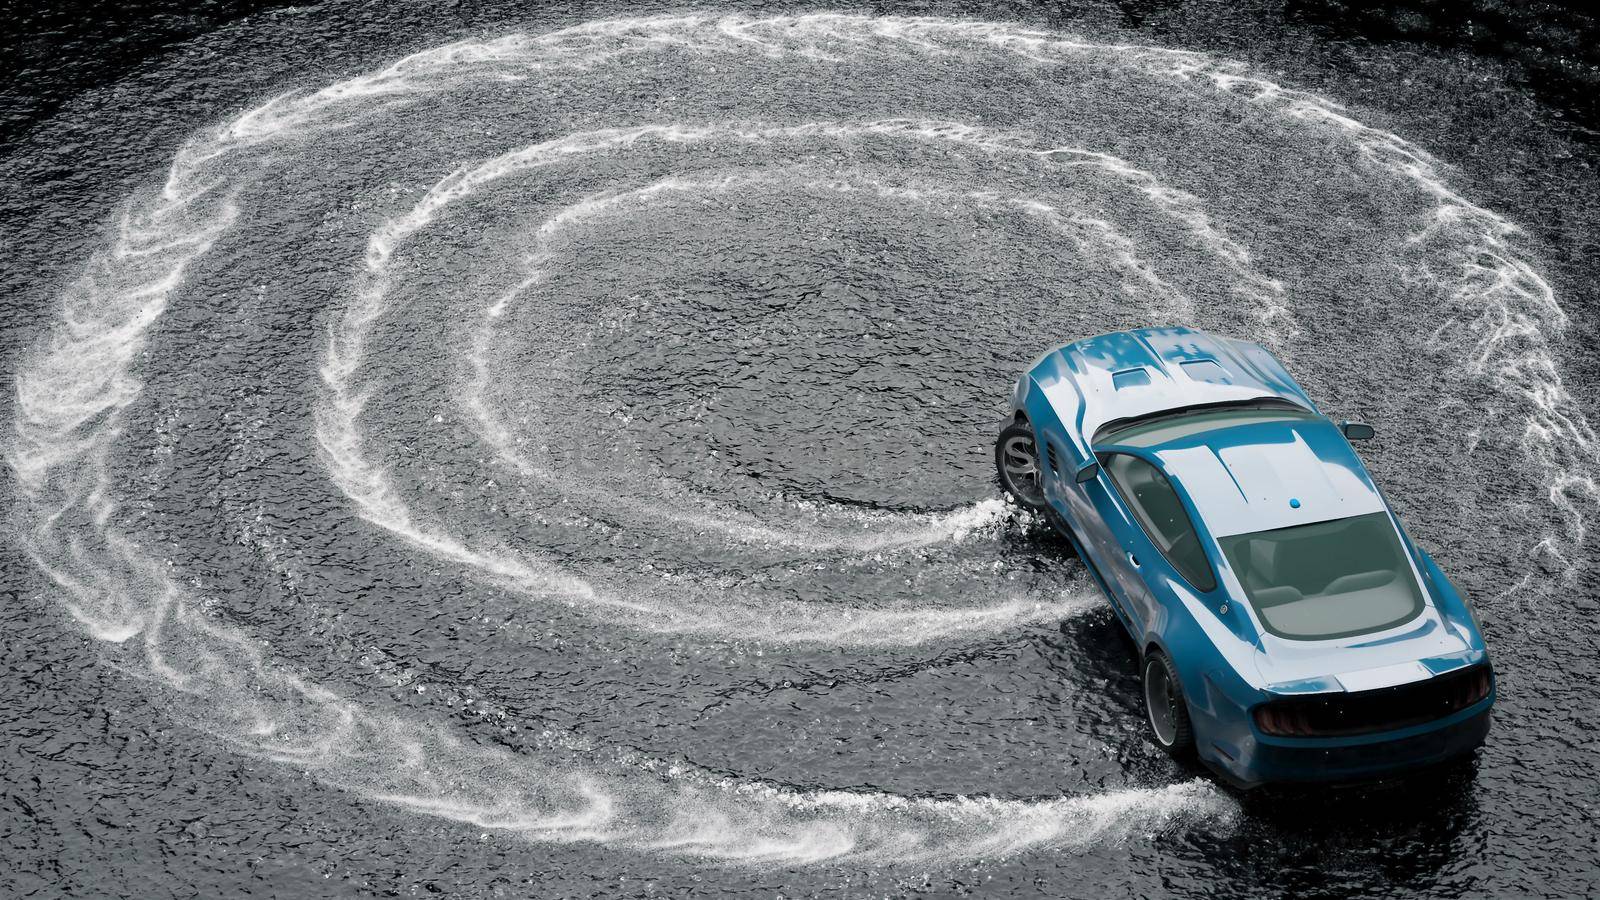 Drift sports car on water on wet asphalt. Splash and foam from rotating wheels. 3D Rendering by designprojects